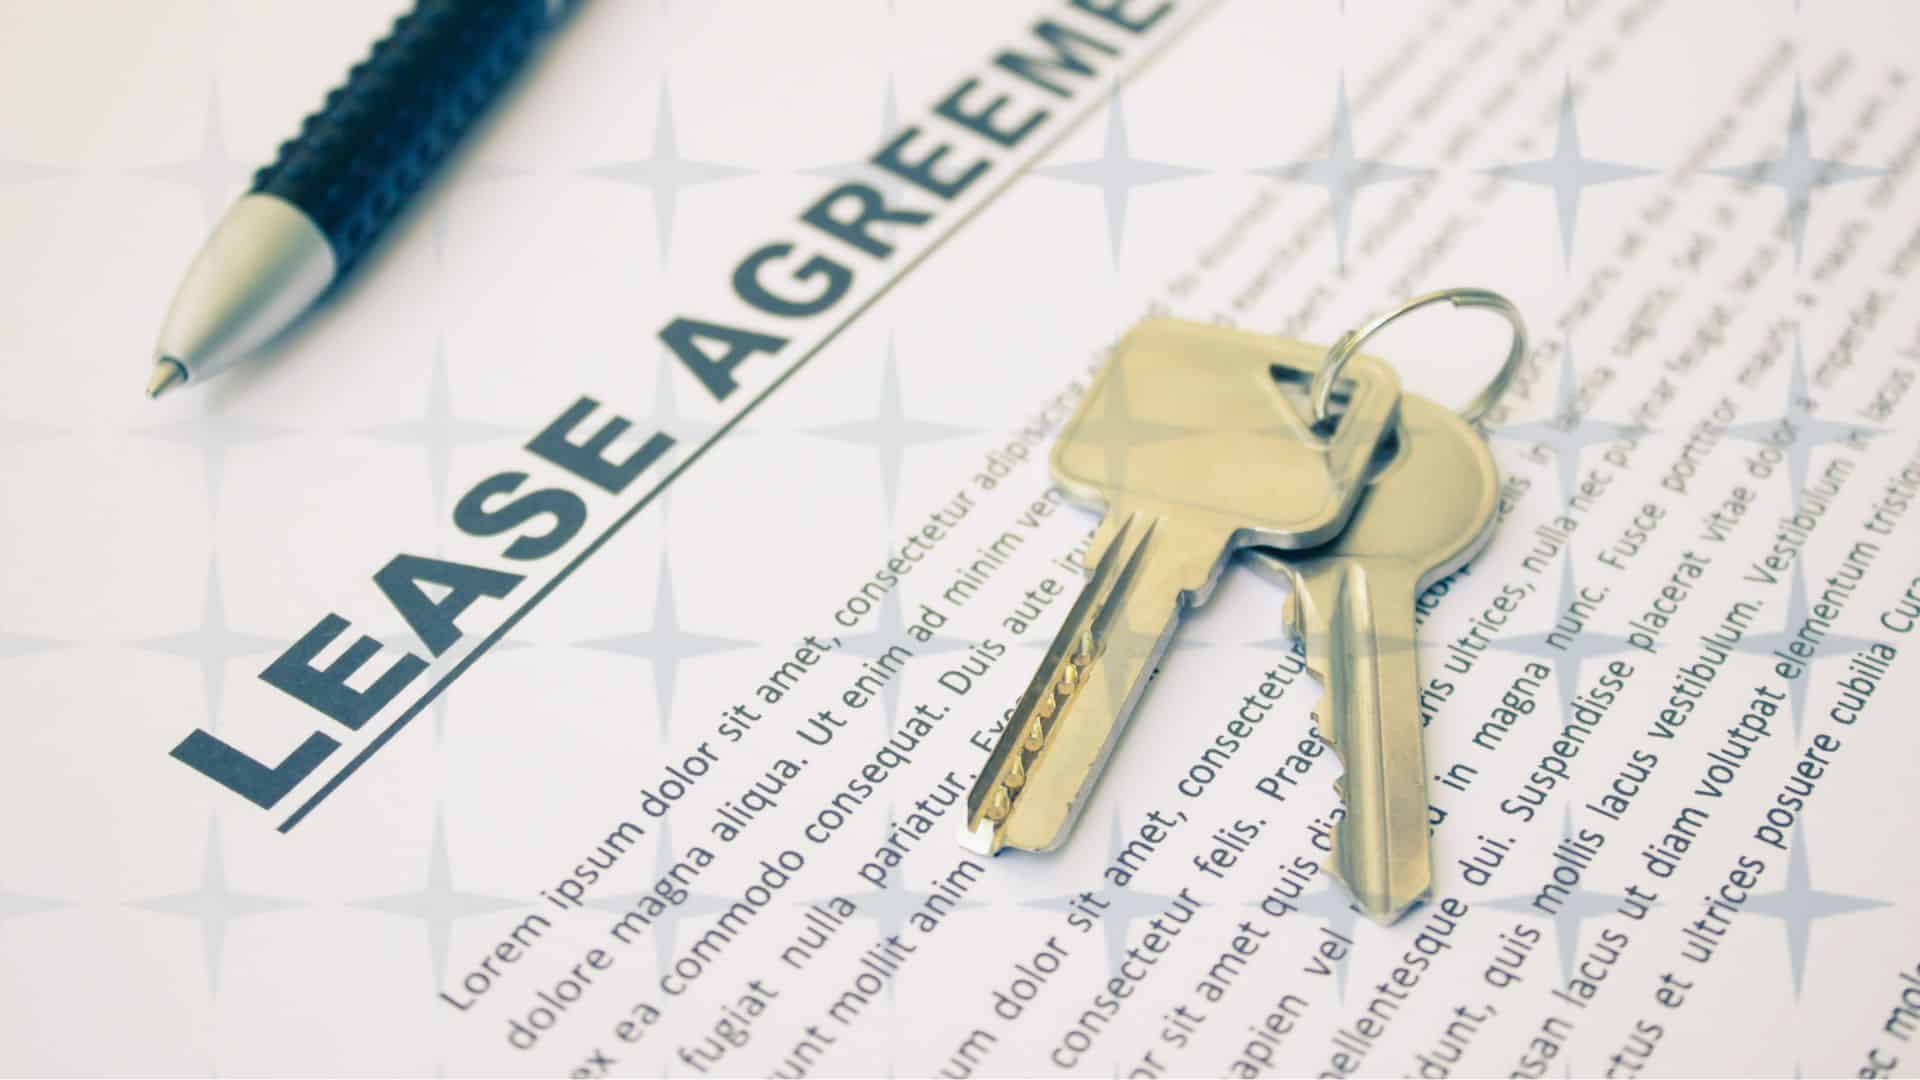 A pen and set of keys resting on a legal document entitled 'Lease Agreement' to help illustrate a commercial property lease agreement.